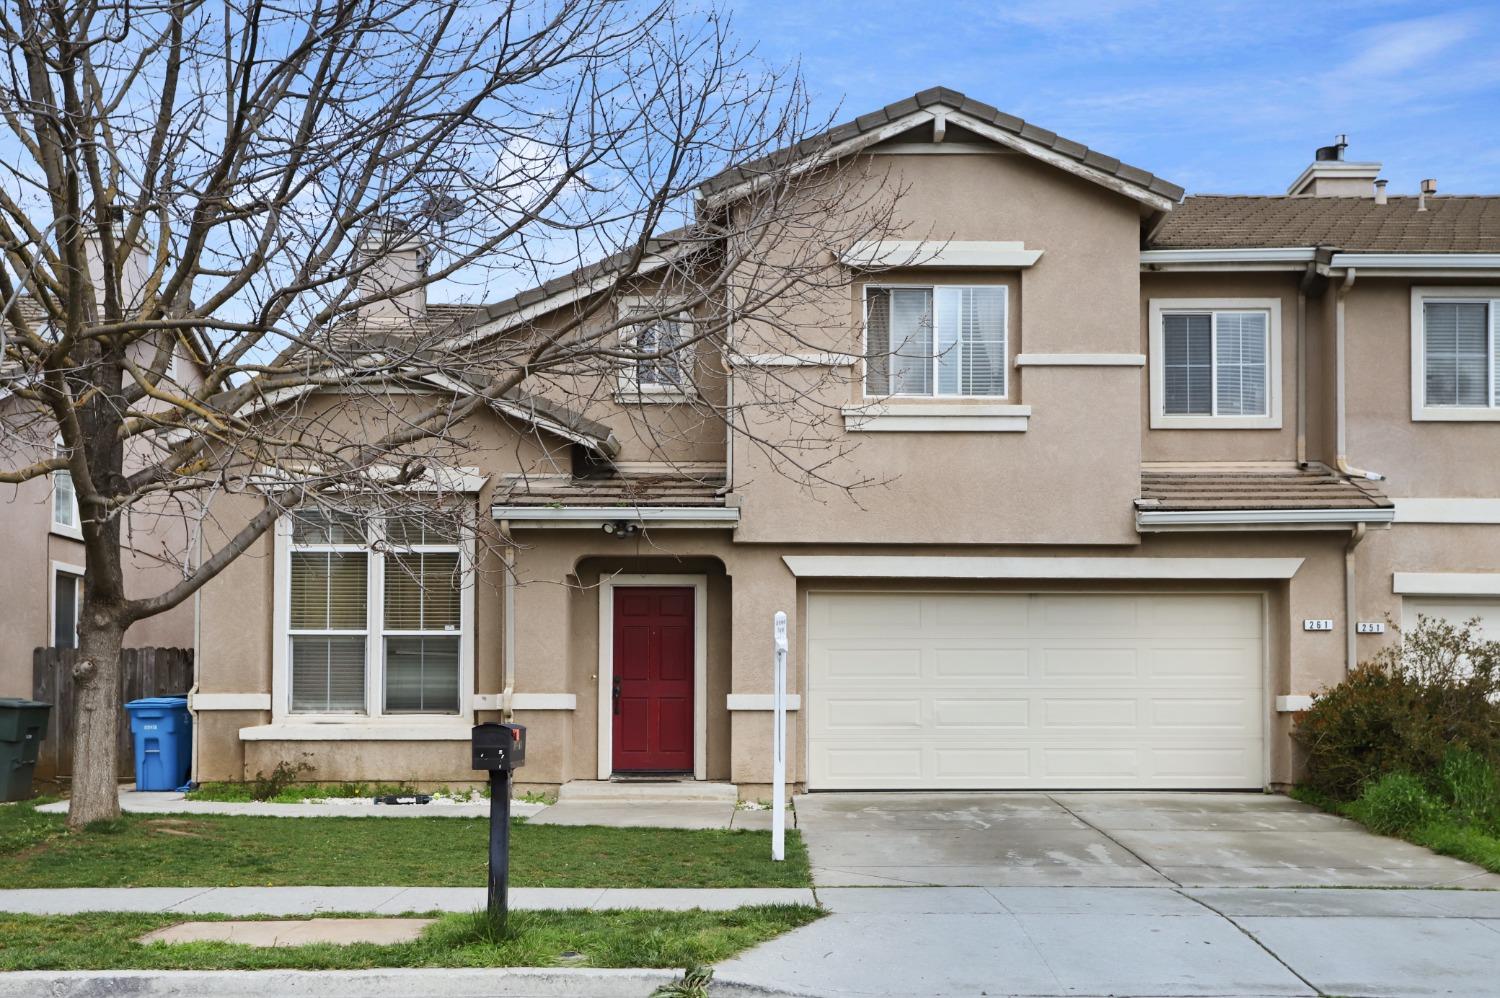 Photo of 261 Ronan Ave in Gilroy, CA